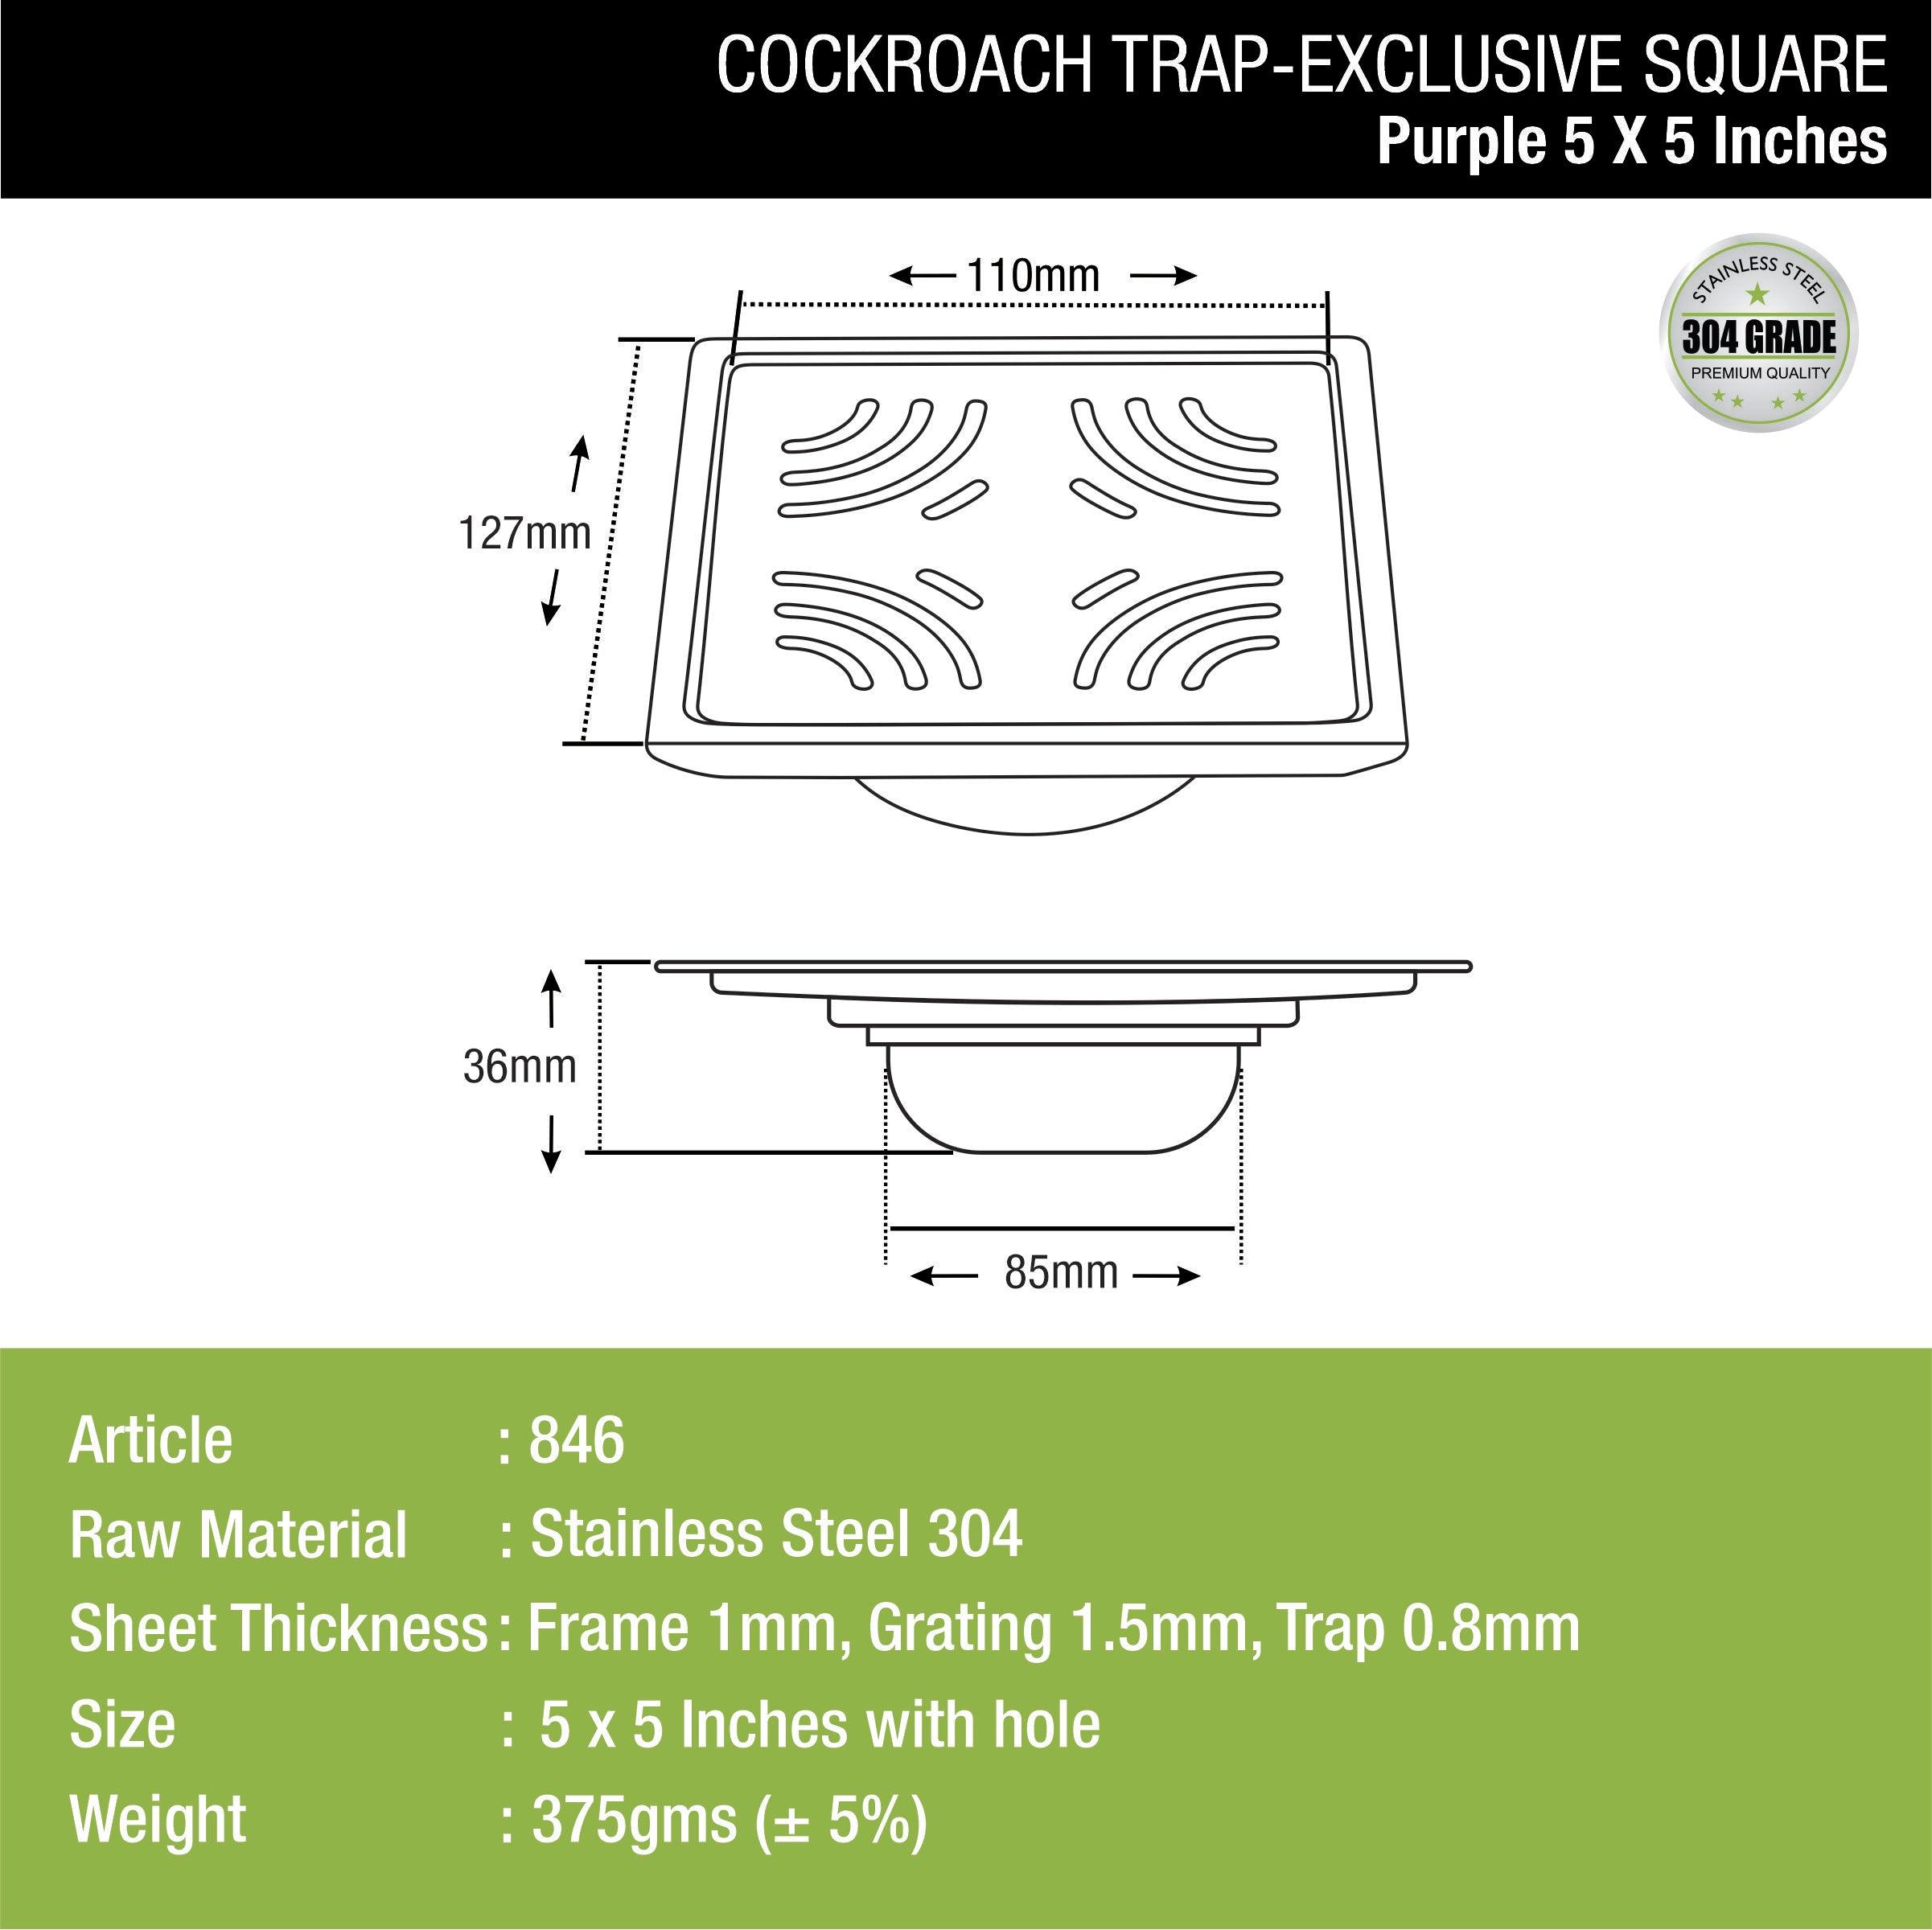 Purple Exclusive Square Floor Drain (5 x 5 Inches) with Cockroach Trap dimensions and sizes